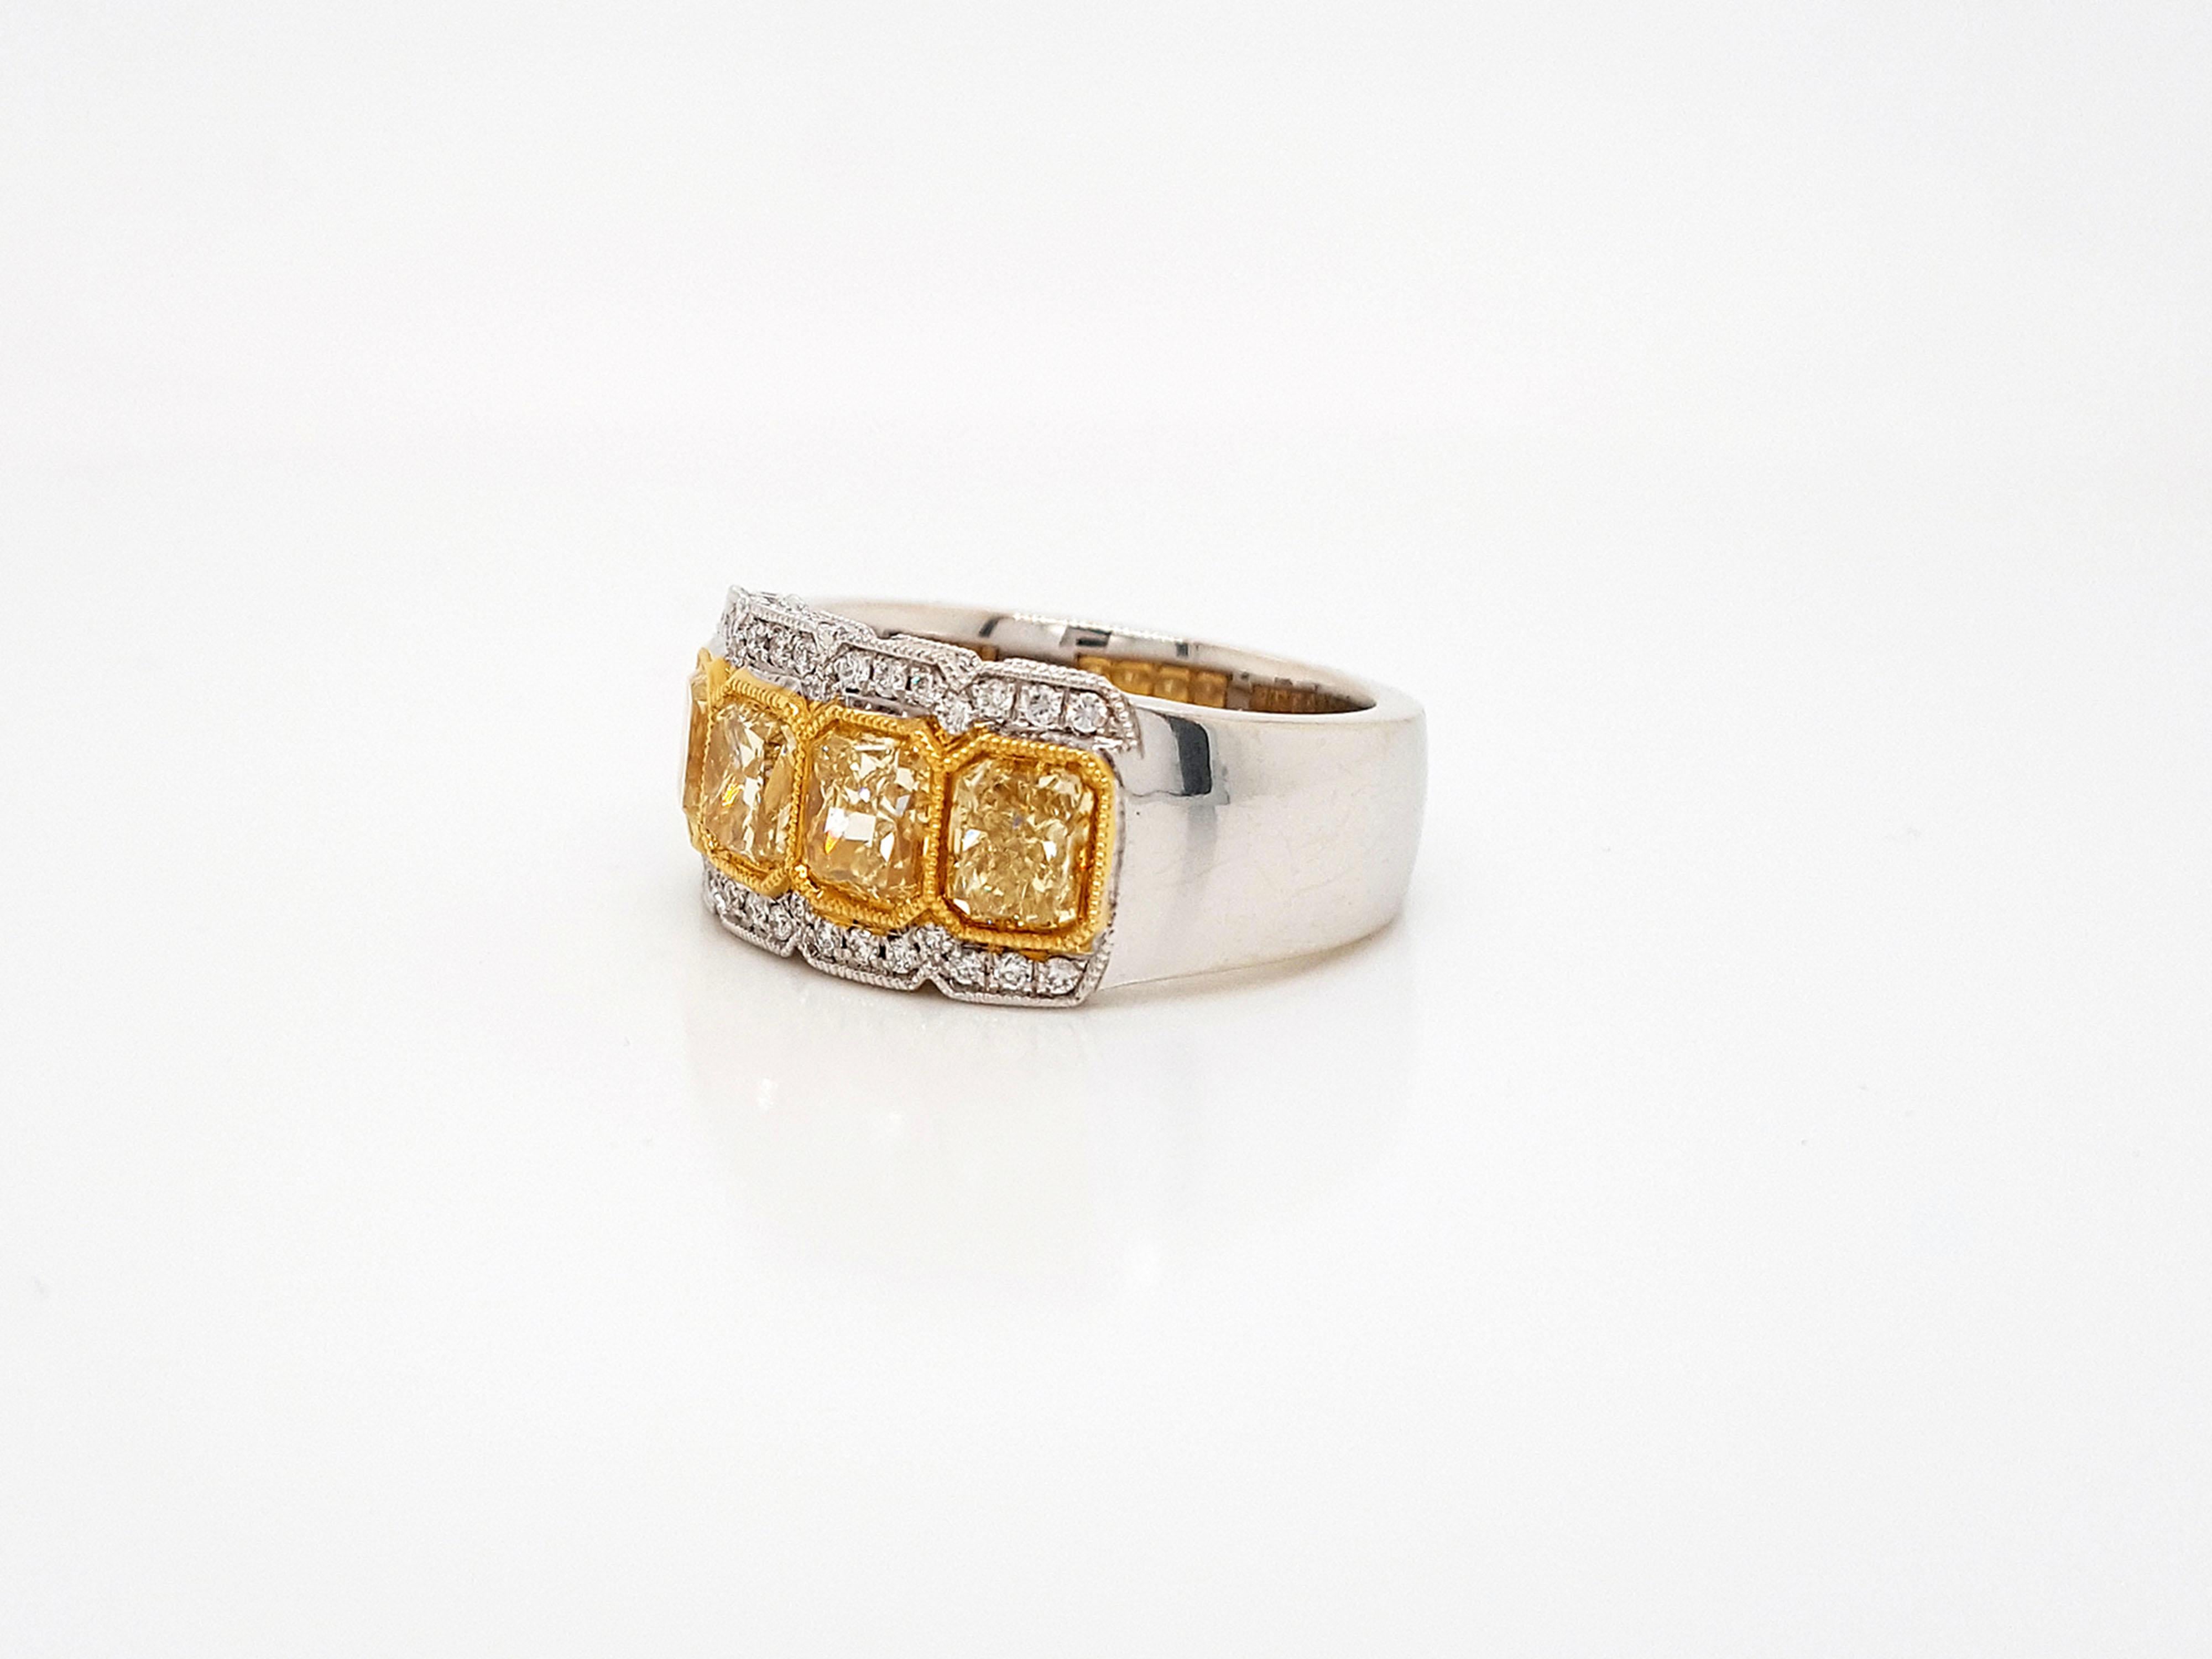 A classic and elegant 2.38 Carat Yellow Radiant Cut Four-Stone Diamond Ring in 18 Karat Gold. 
This ring set with 4 yellow radiant cut diamonds weighing approximately 2.38 carat, flanked by a 62 round brilliant 0.27 carat diamond, mounted in 18k